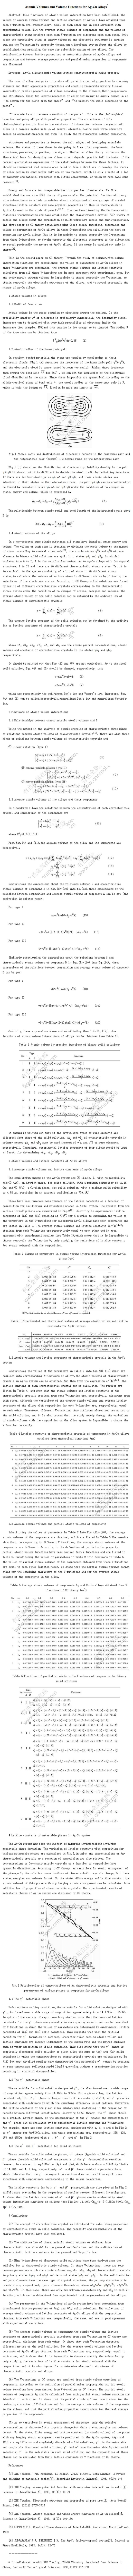 Atomic Volumes and Volume Functions for Ag-Cu Alloys